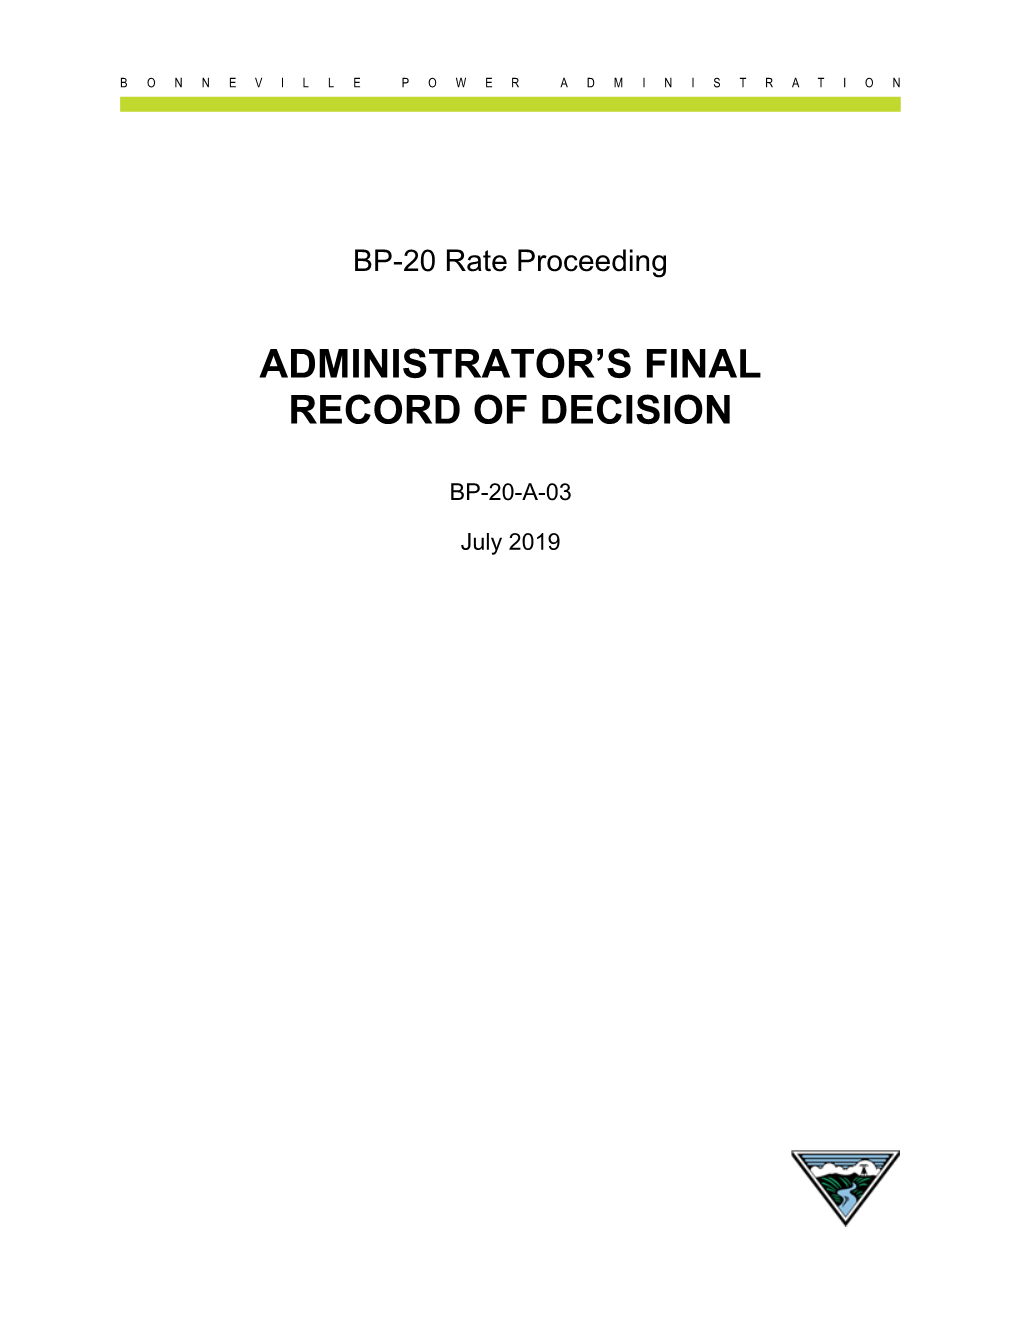 BP-20 Rate Proceeding Administrator Record of Decision BP-20-A-03